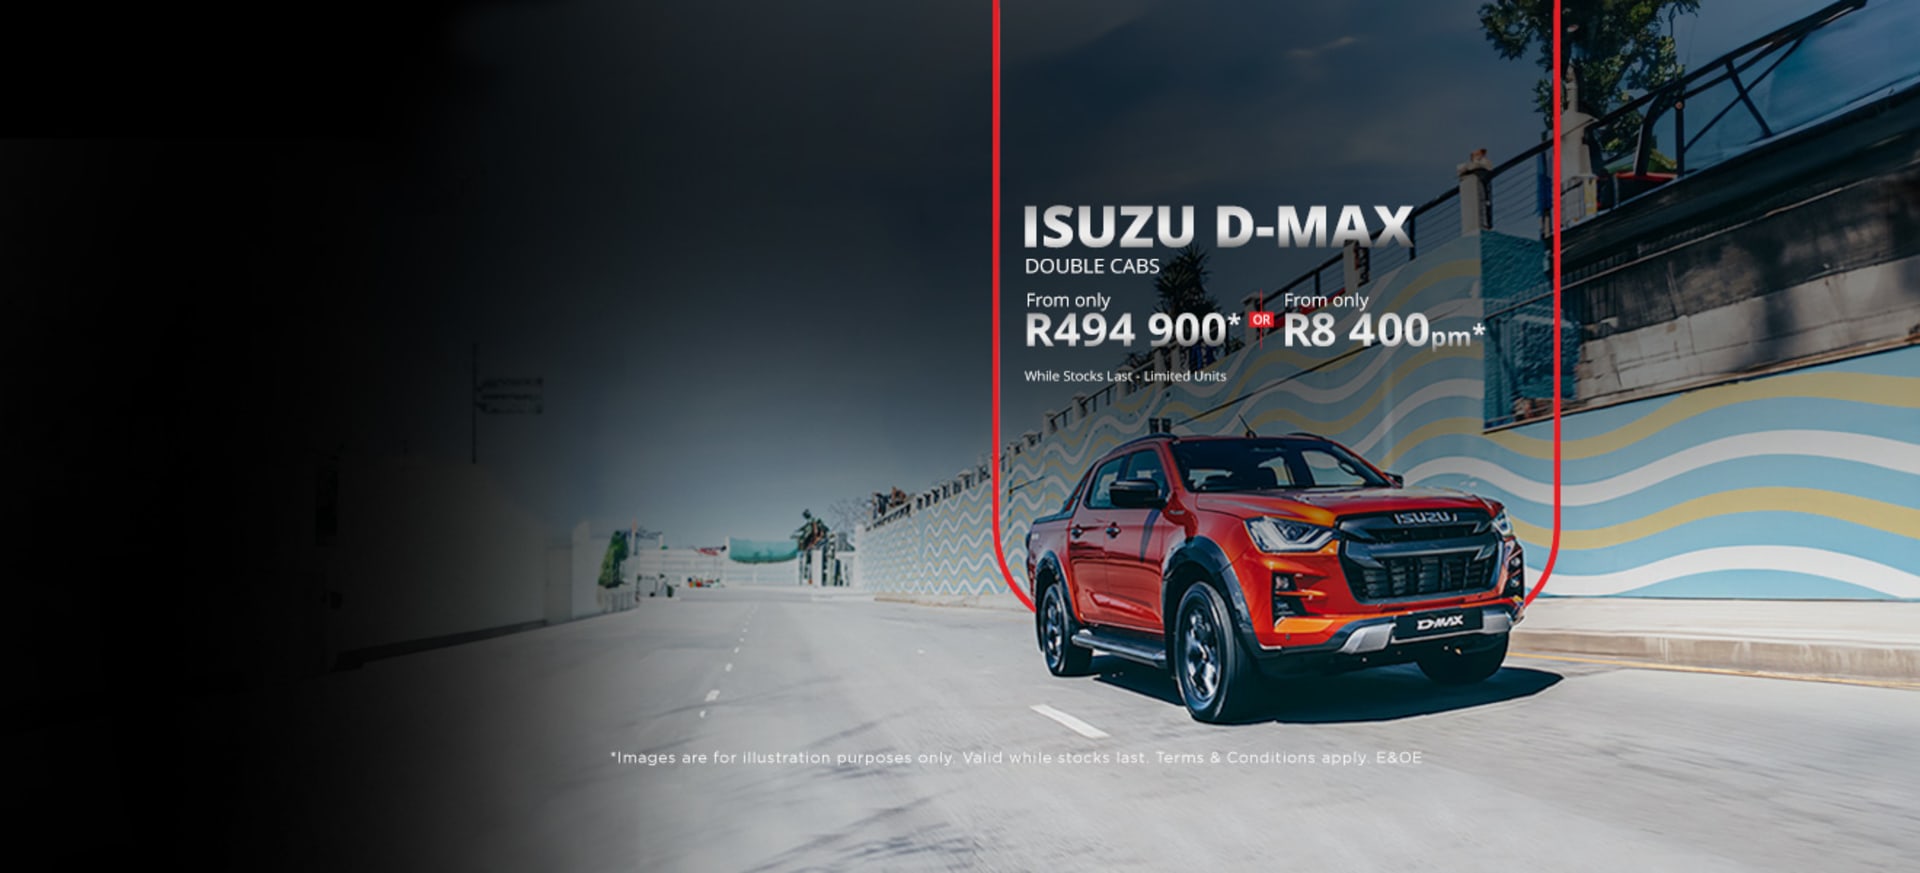 Isuzu Double Cabs From R494 900* or R8 400pm*